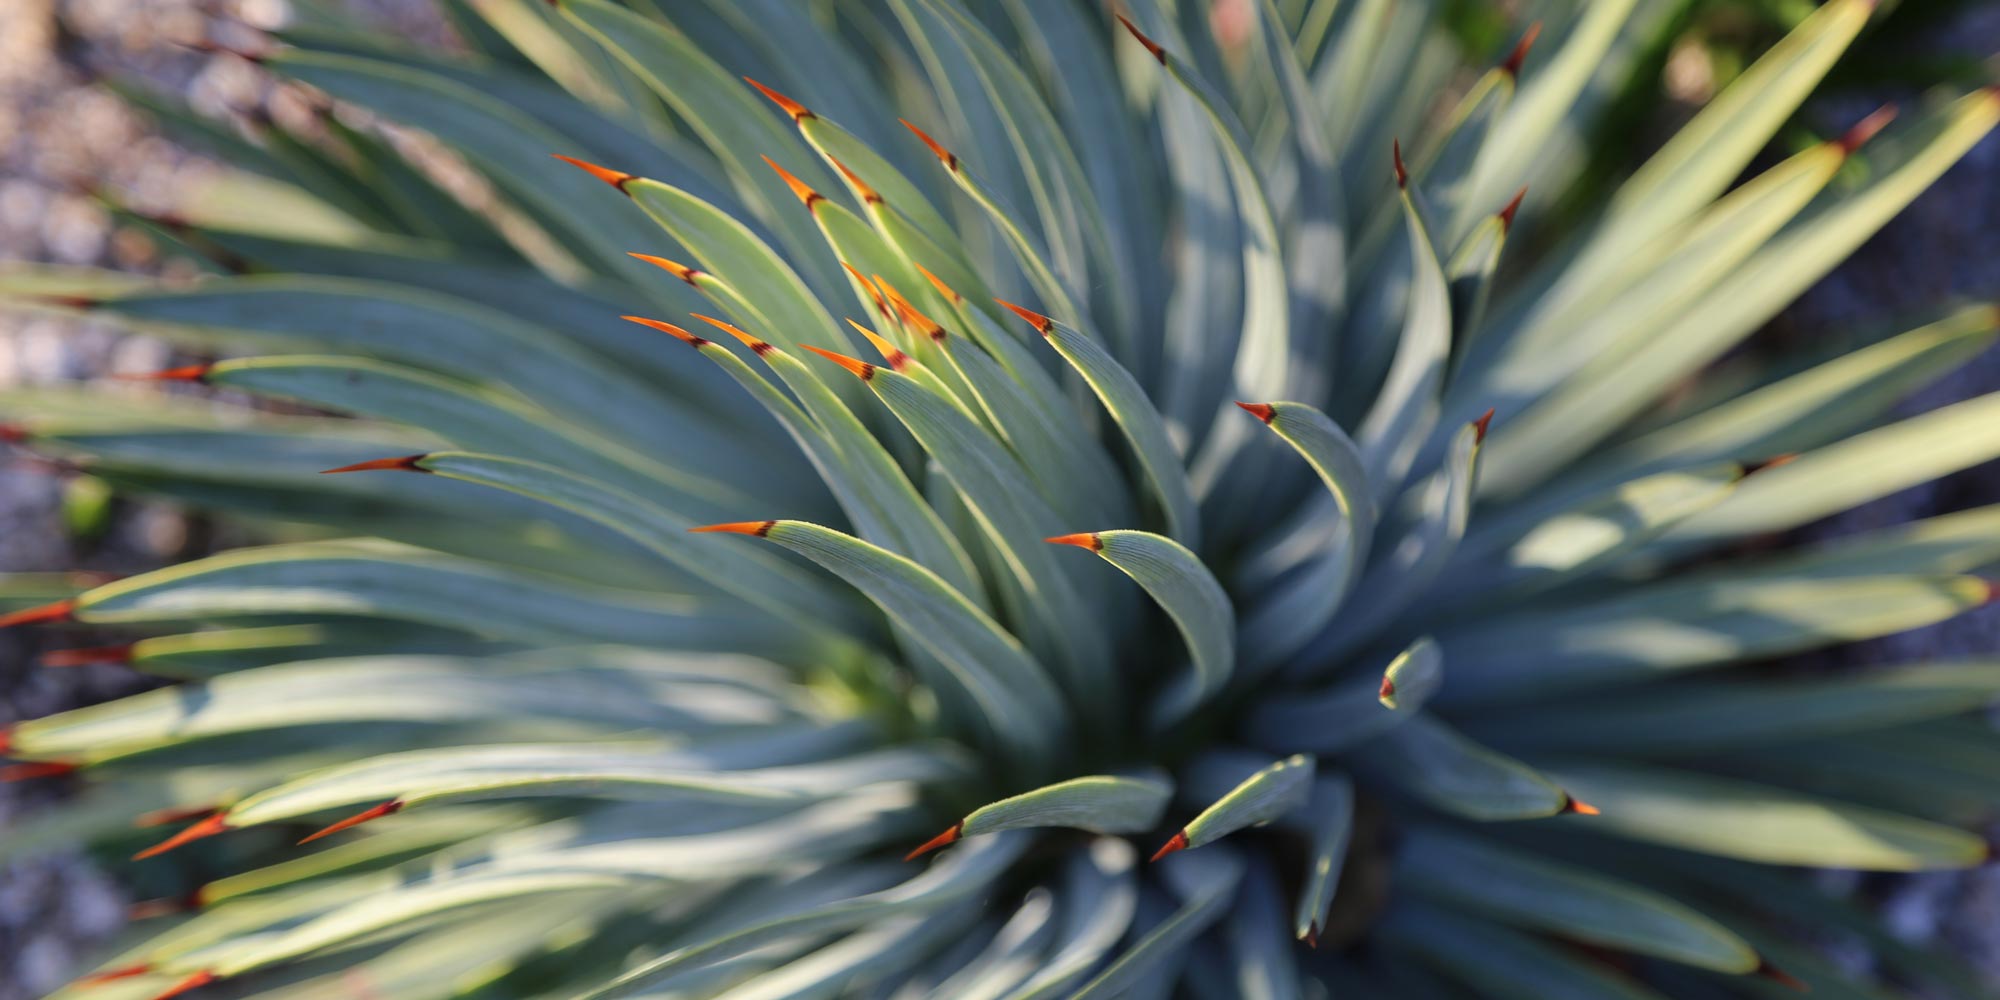 Drought resistant agave